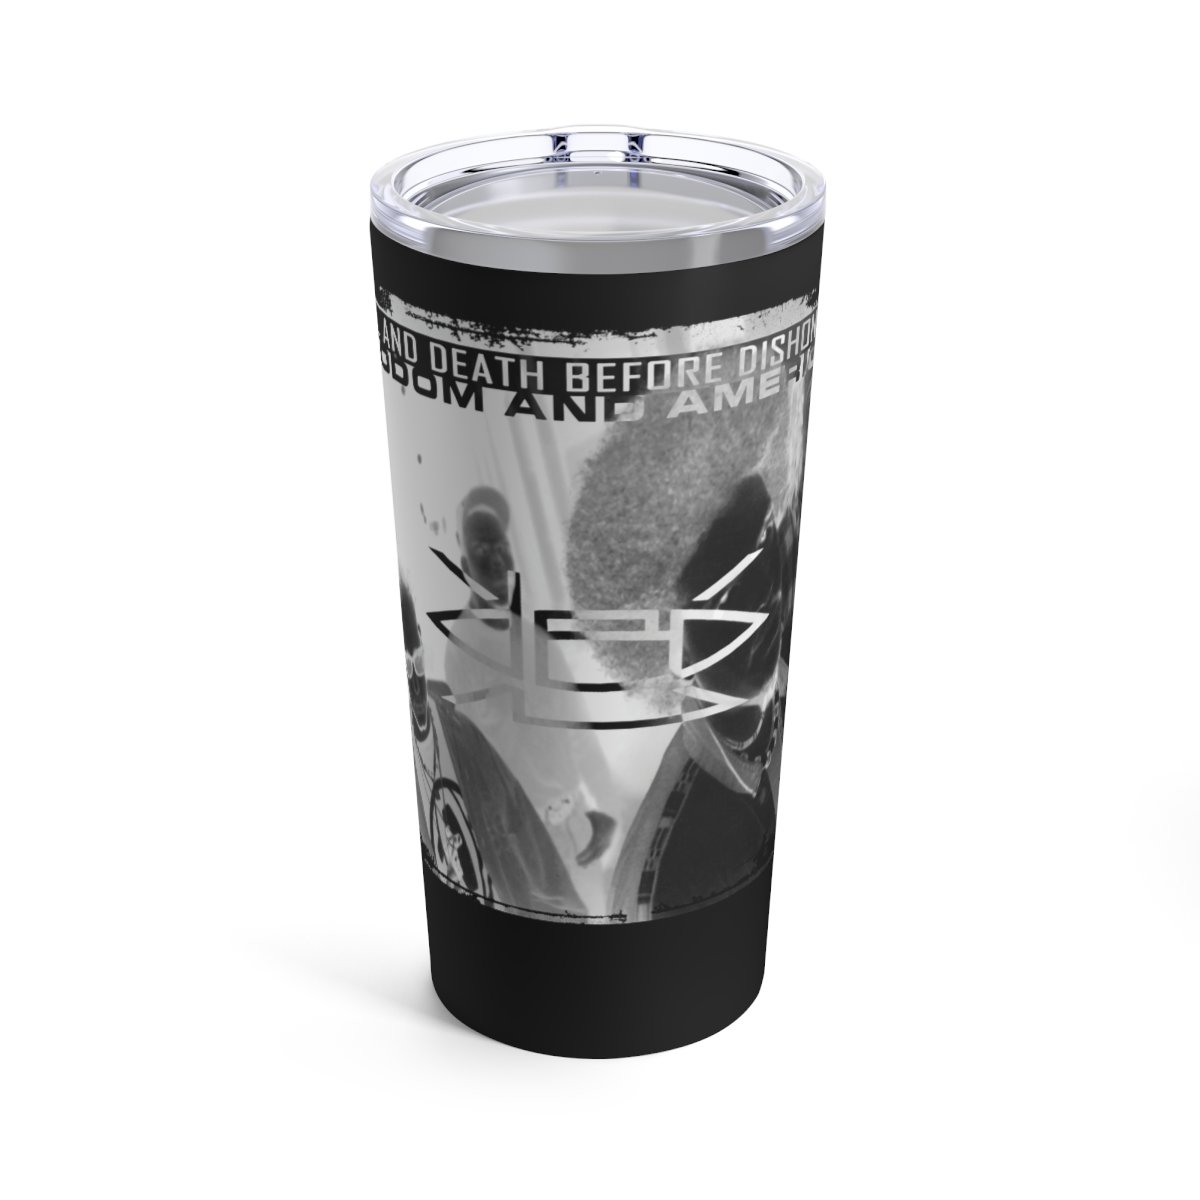 XL & DBD – Sodom and America 20oz Stainless Steel Tumbler